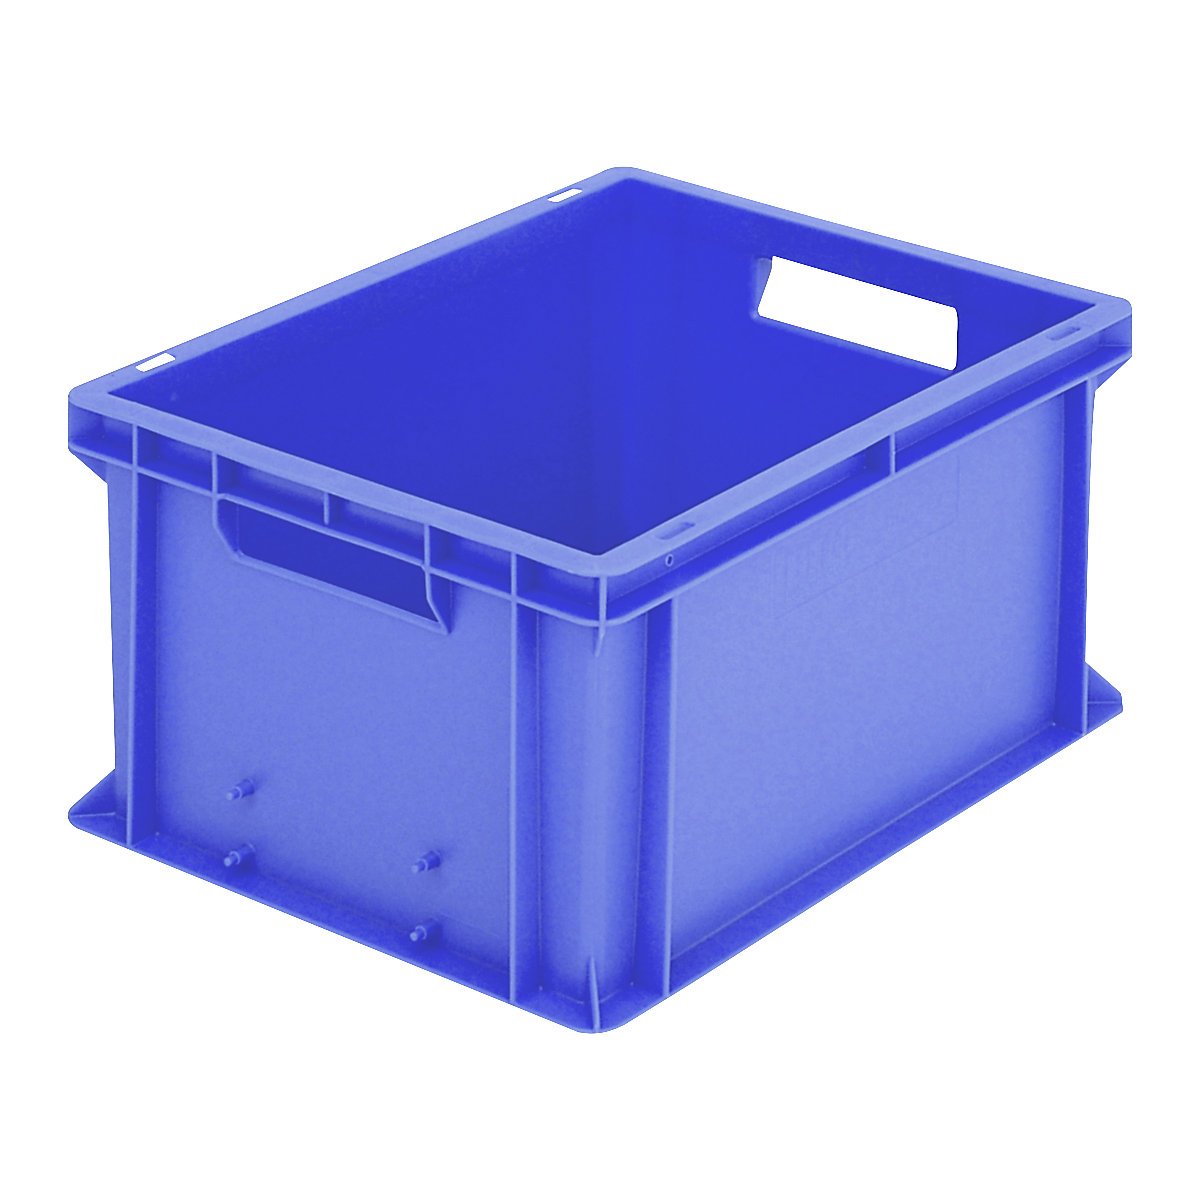 BN Euro stacking container – BITO, solid walls and base, LxWxH 400 x 300 x 215 mm-2